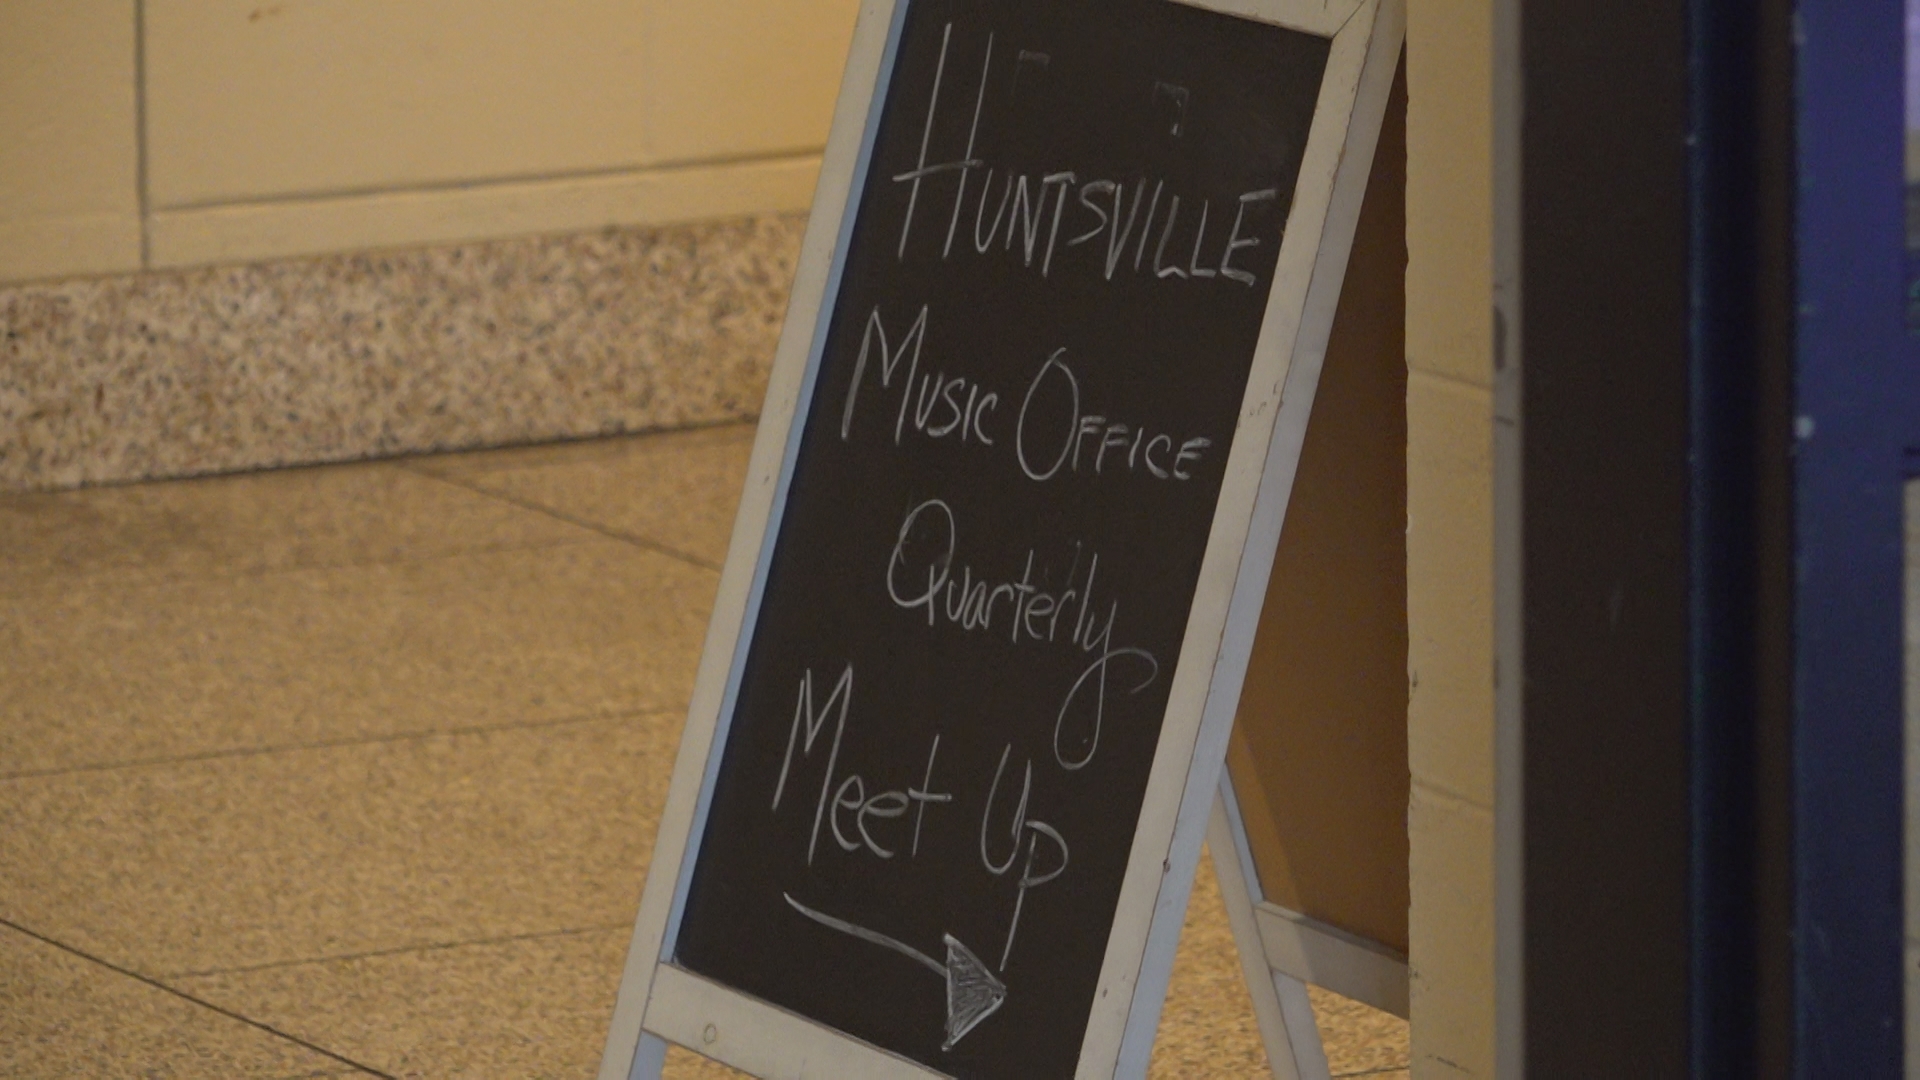 Music is becoming a big part of Huntsville's identity, and these meetups give musicians and fans a chance to talk about what's next.